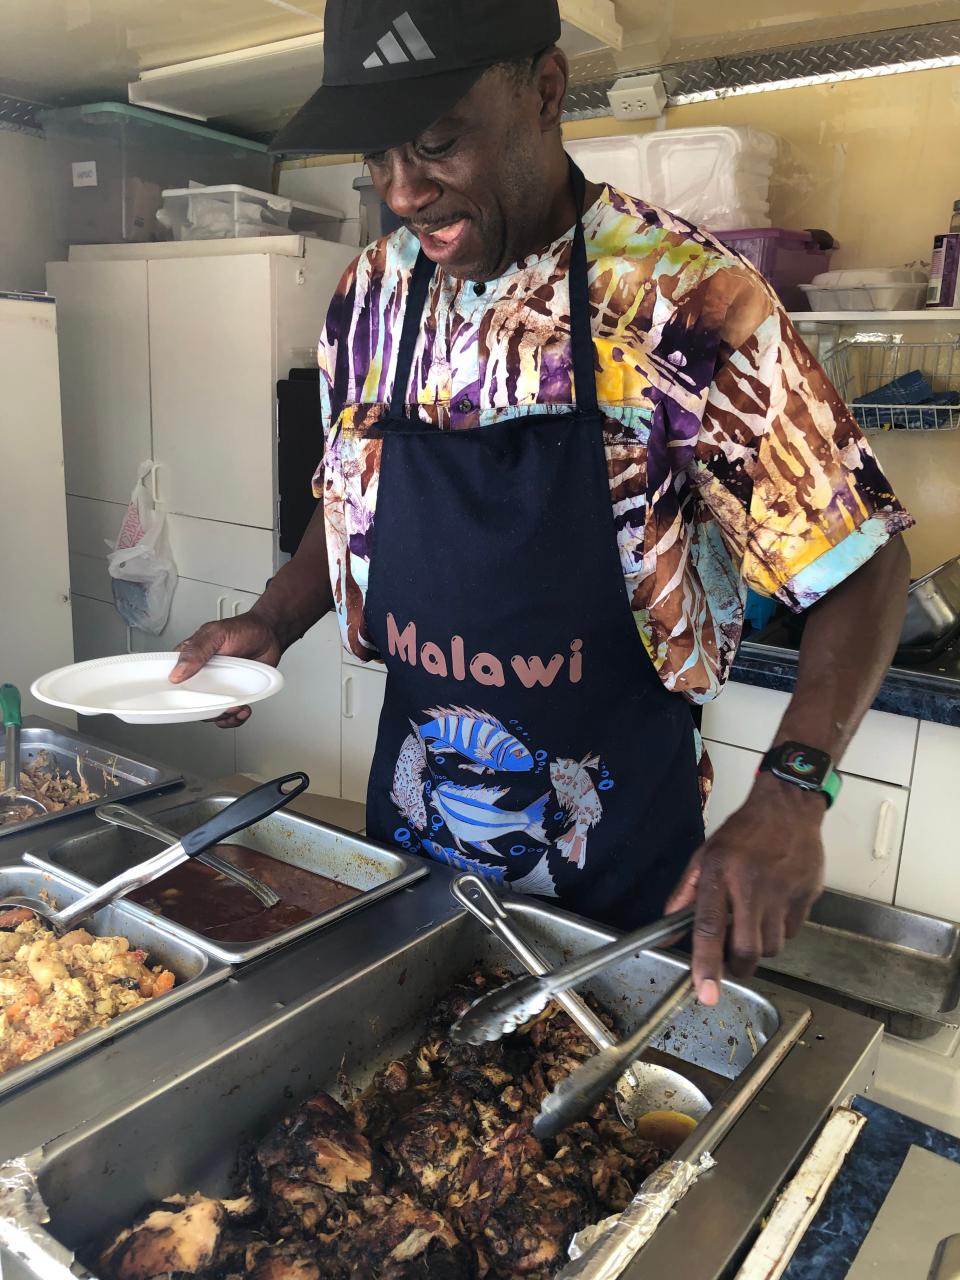 John Pangani serves up jerk chicken that he's made in the style and spices of his homeland, the African country of Malawi, on Saturday, Sept. 9, 2023, at Fusion Fest at Howard Park in South Bend.